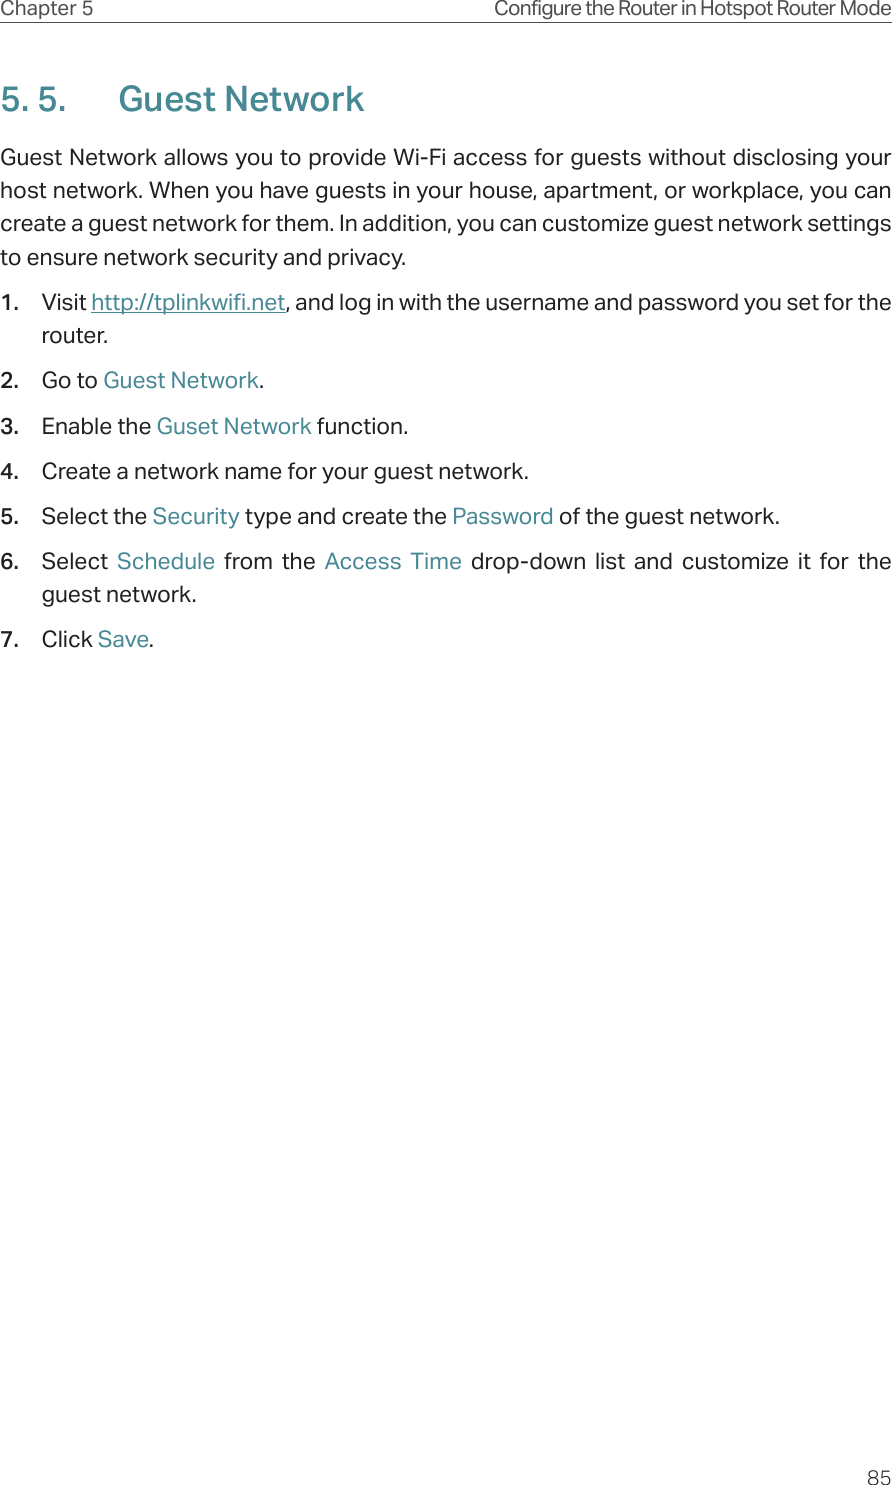 85Chapter 5 Configure the Router in Hotspot Router Mode5. 5.  Guest NetworkGuest Network allows you to provide Wi-Fi access for guests without disclosing your host network. When you have guests in your house, apartment, or workplace, you can create a guest network for them. In addition, you can customize guest network settings to ensure network security and privacy.1.  Visit http://tplinkwifi.net, and log in with the username and password you set for the router.2.  Go to Guest Network.3.  Enable the Guset Network function.4.  Create a network name for your guest network.5.  Select the Security type and create the Password of the guest network.6.  Select  Schedule  from the Access Time drop-down list and customize it for the guest network.7.  Click Save.